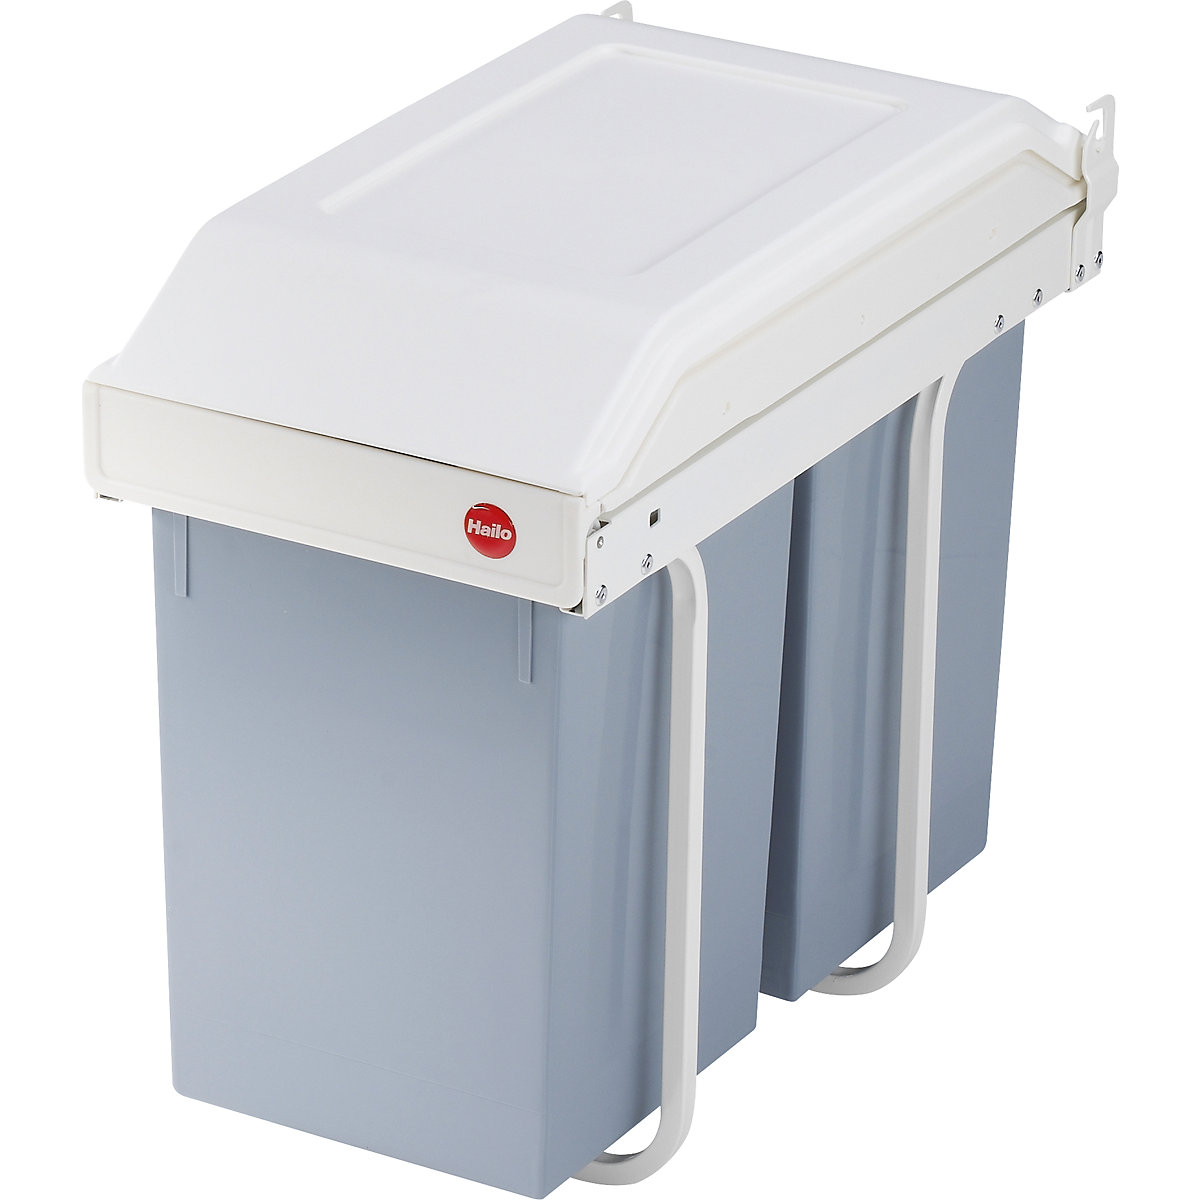 Multi-Box duo L built-in waste separation system – Hailo